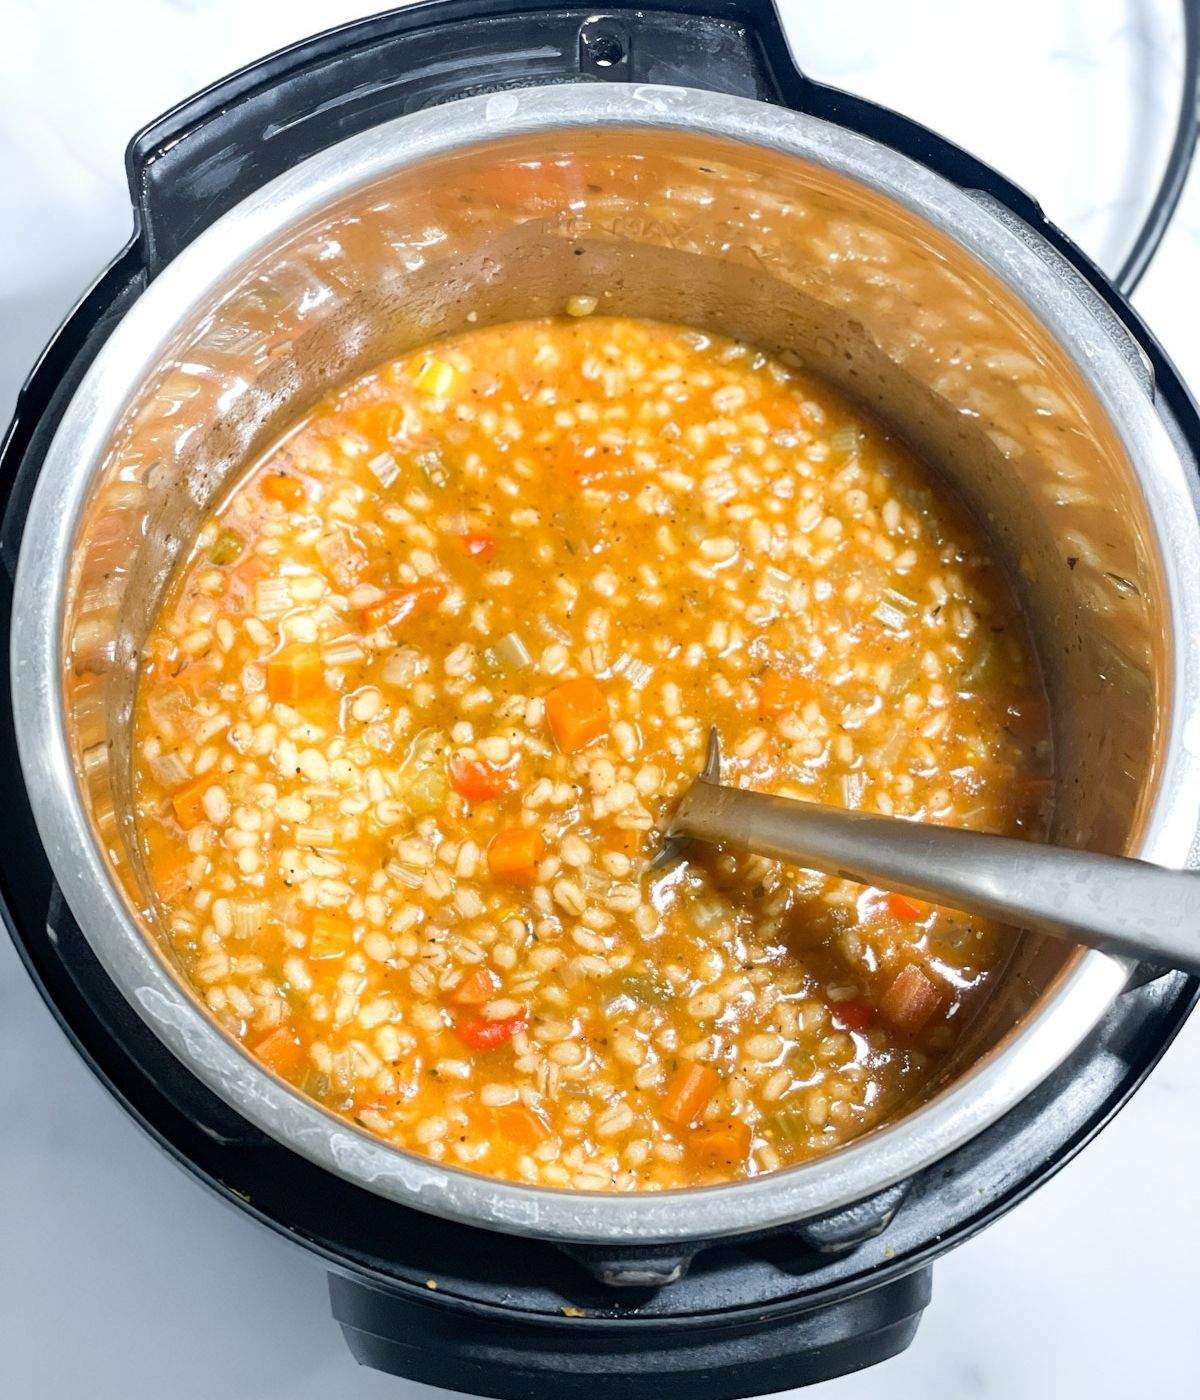 A pot of vegetable barley soup is on the table with big spoon.